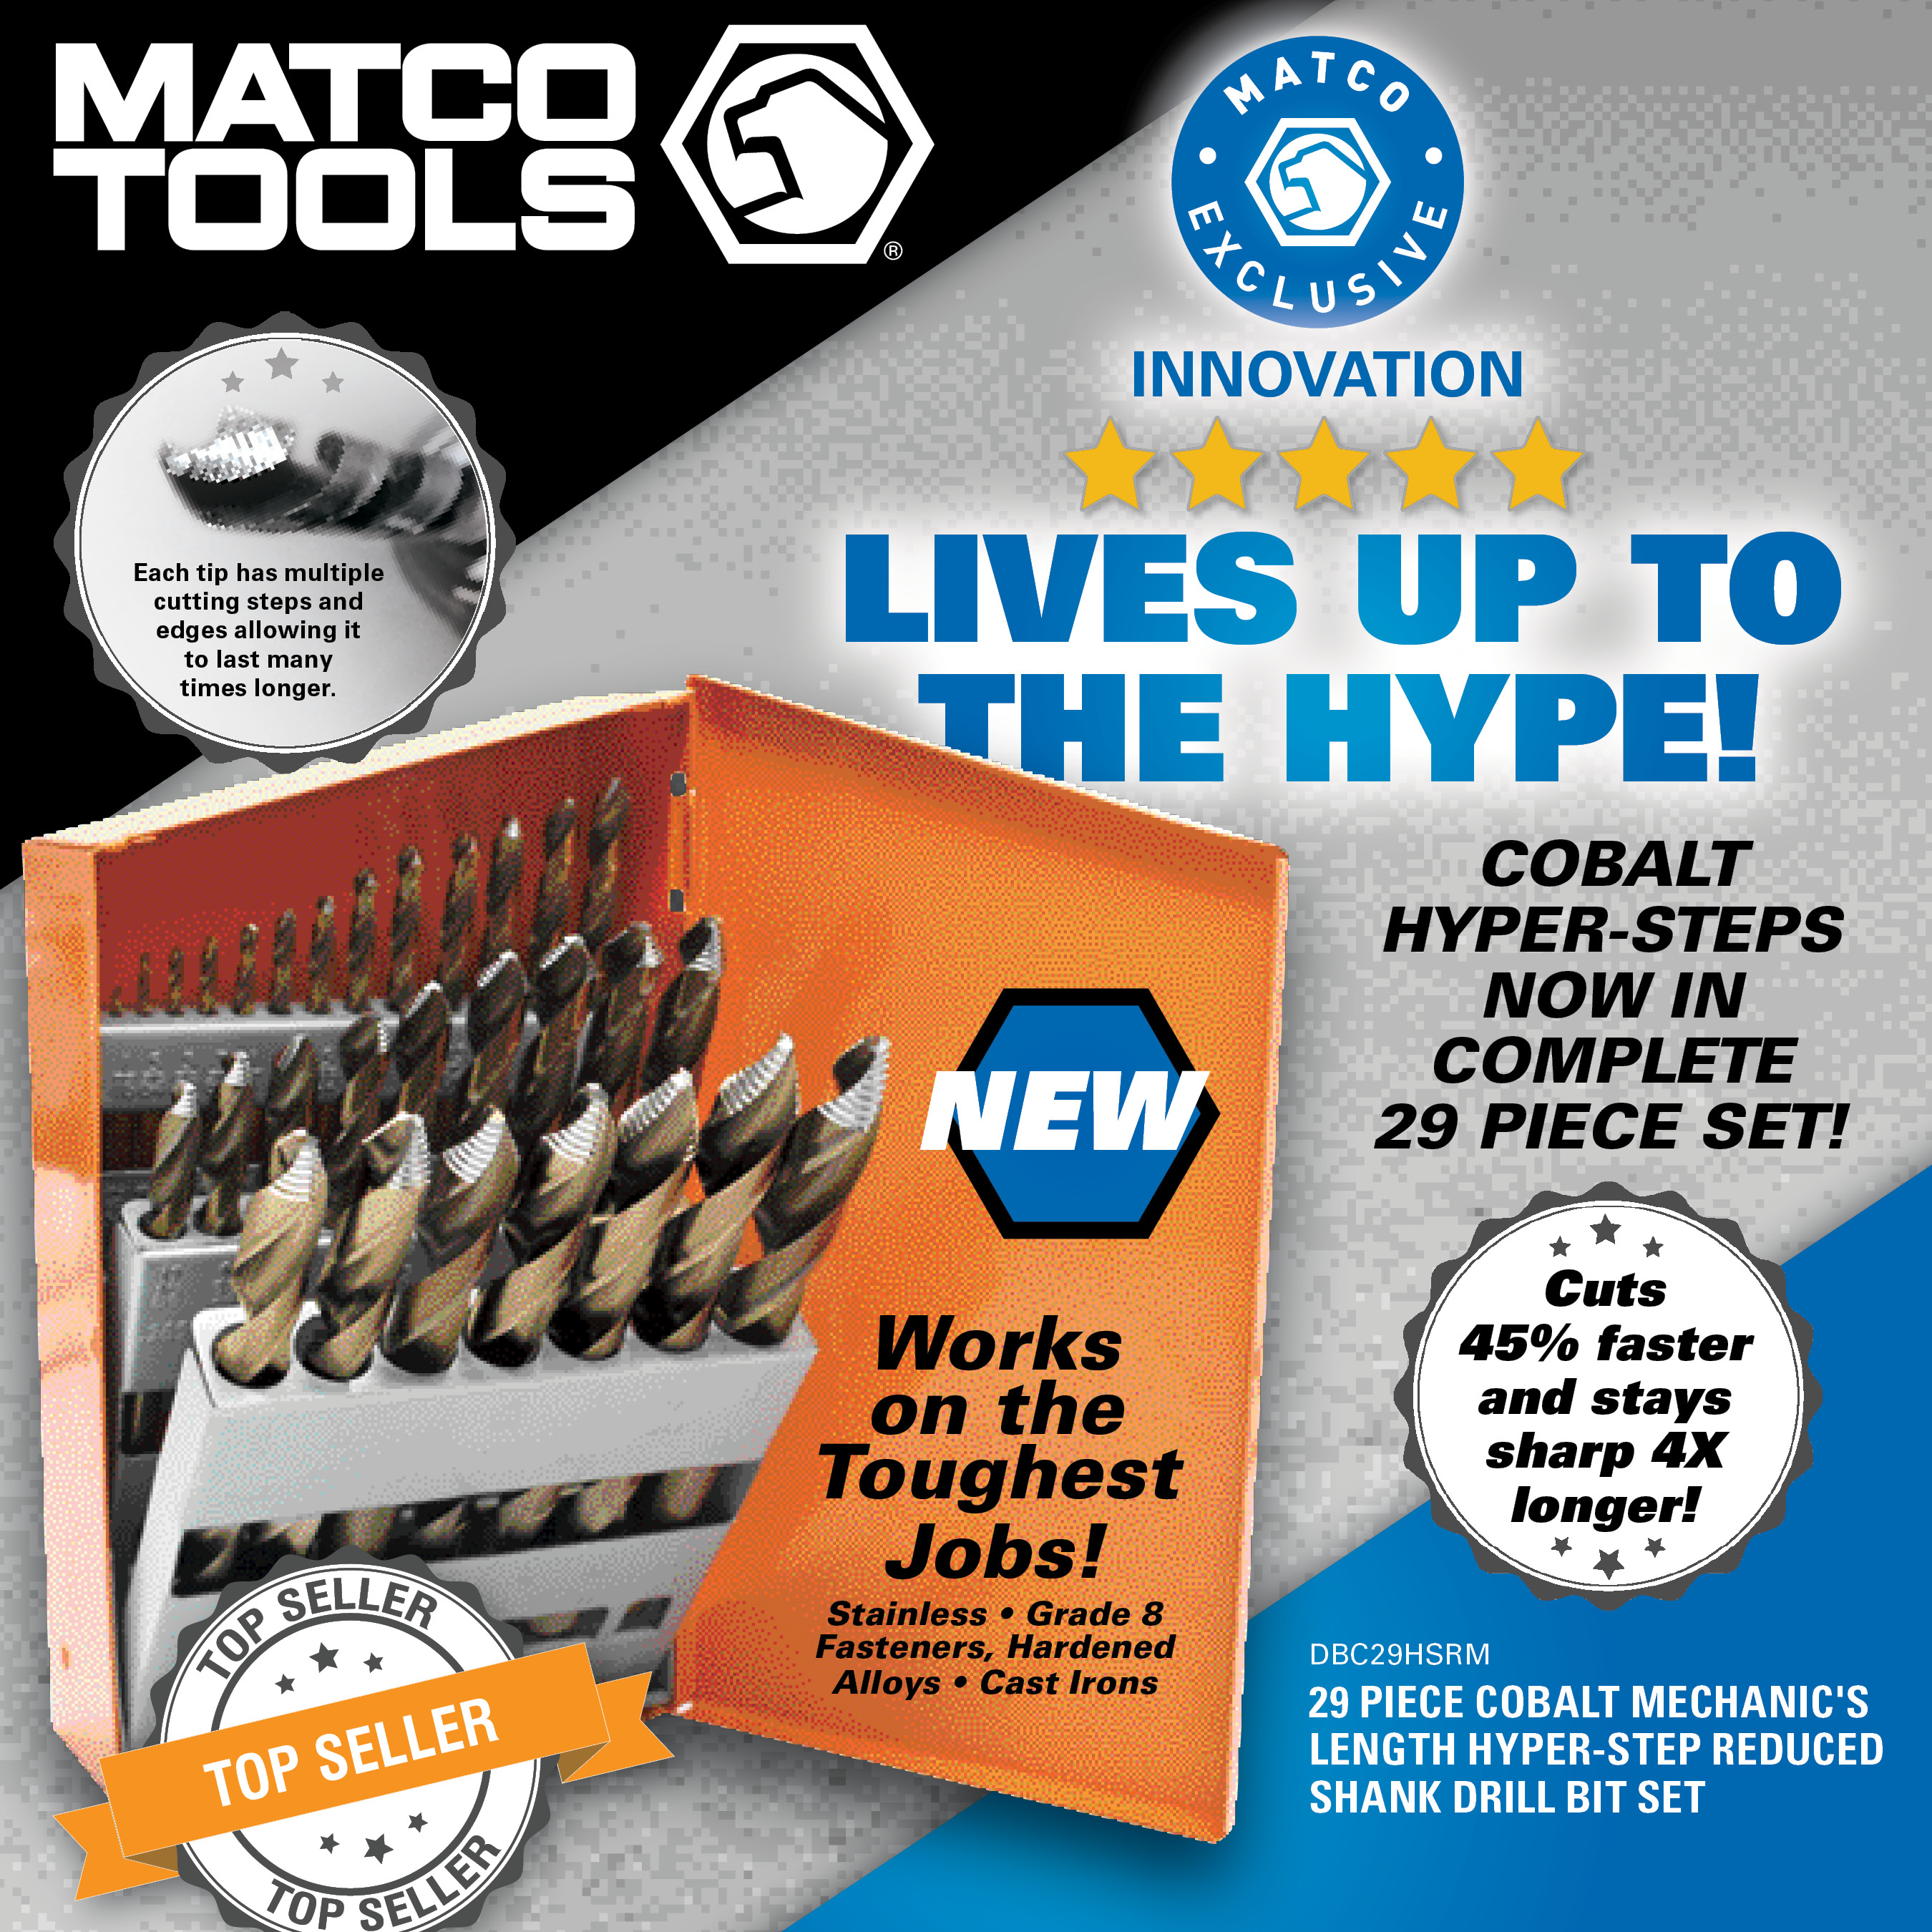 5 Jobs That Are No Match for Matco Hyper-Steps